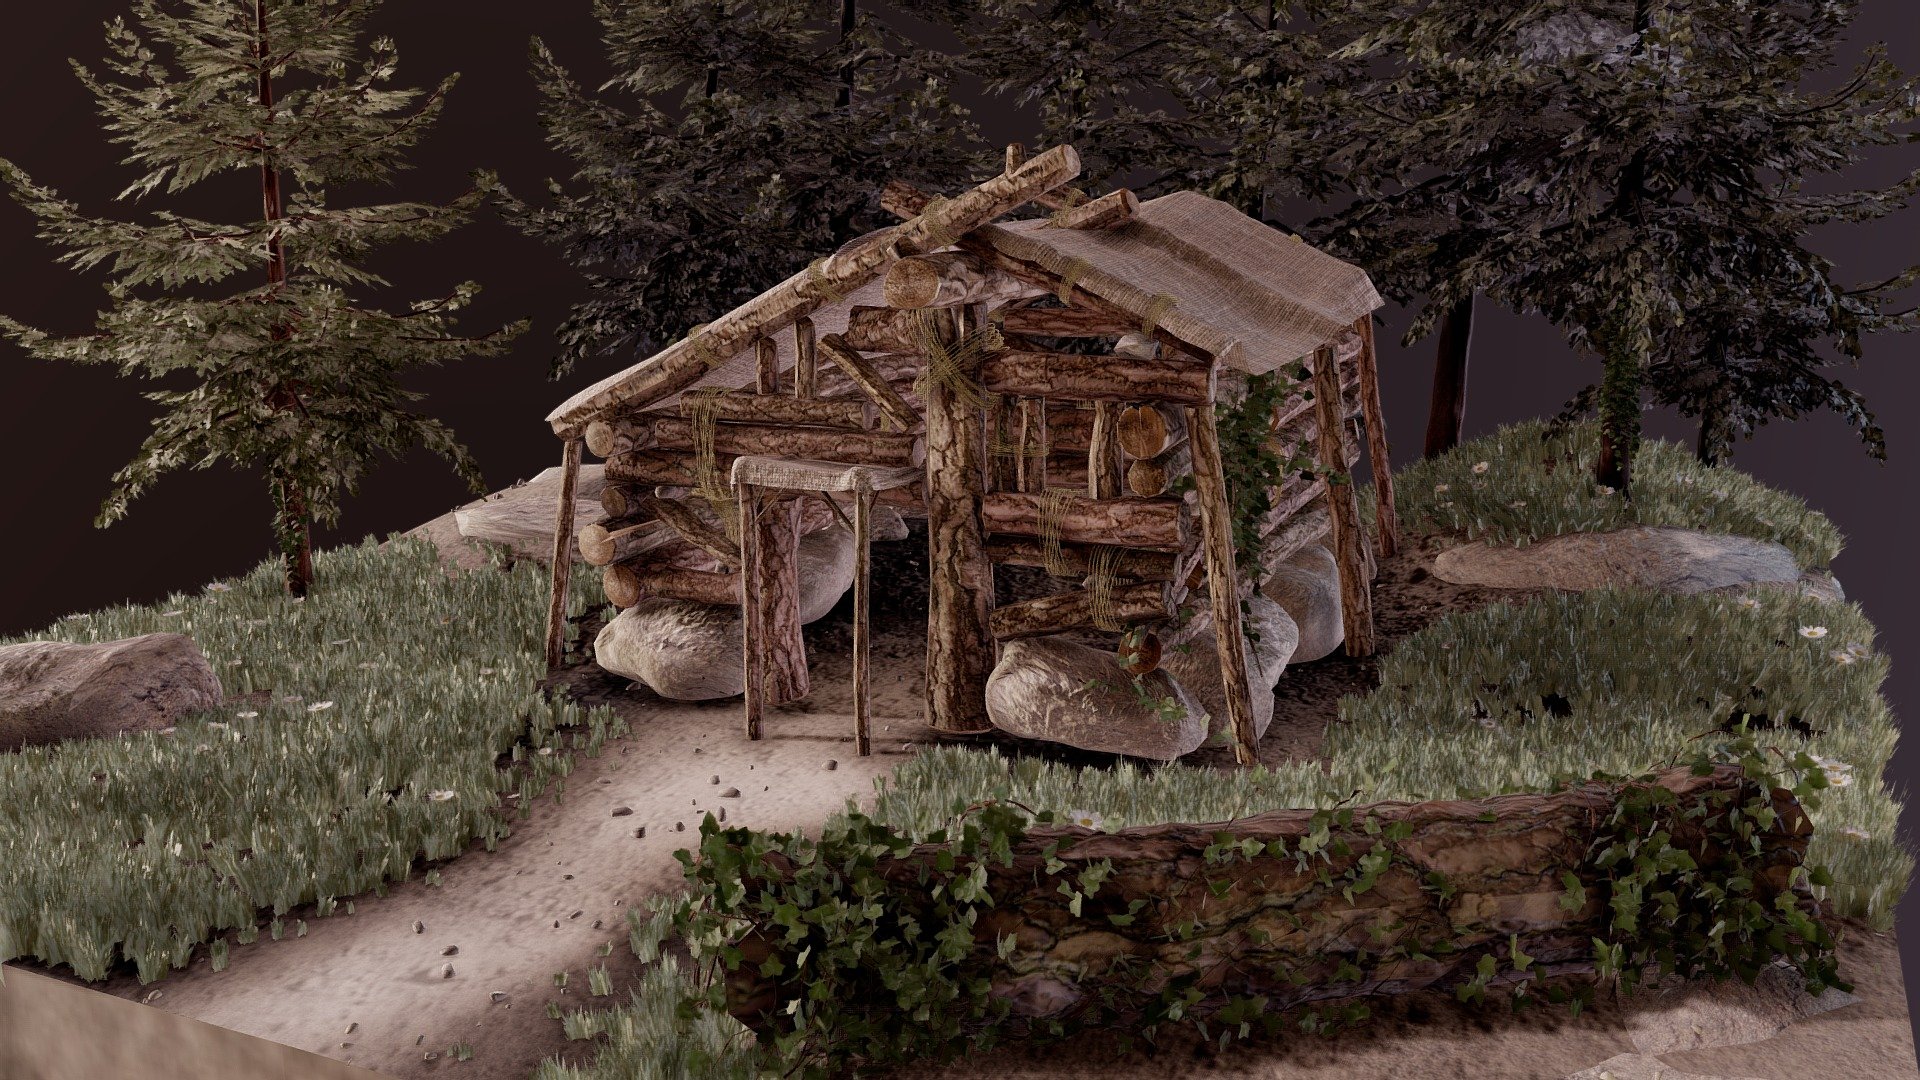 A little scene created for the Little Cabin Challenge from Sketchfab, insipired by the woodcutter's house from Zelda Breath of the Wild !
This was created in a couple of days as I just discovered that Sketchfab did challenges a couple of days ago ahahaa !
This is my first time uploading to Sketchfab and participating to a challenge like that, that was quite a fun experience that I'm really excited to make again !

If I had more time this is what I would have improved :

More details on vegetation and globaly on the scene, on the house especially (by creating an interior for example !)
I hope you'll like it !

Good luck to all the candidates ! ^-^ - Woodcutter's House - Download Free 3D model by lhaegy.fu 3d model